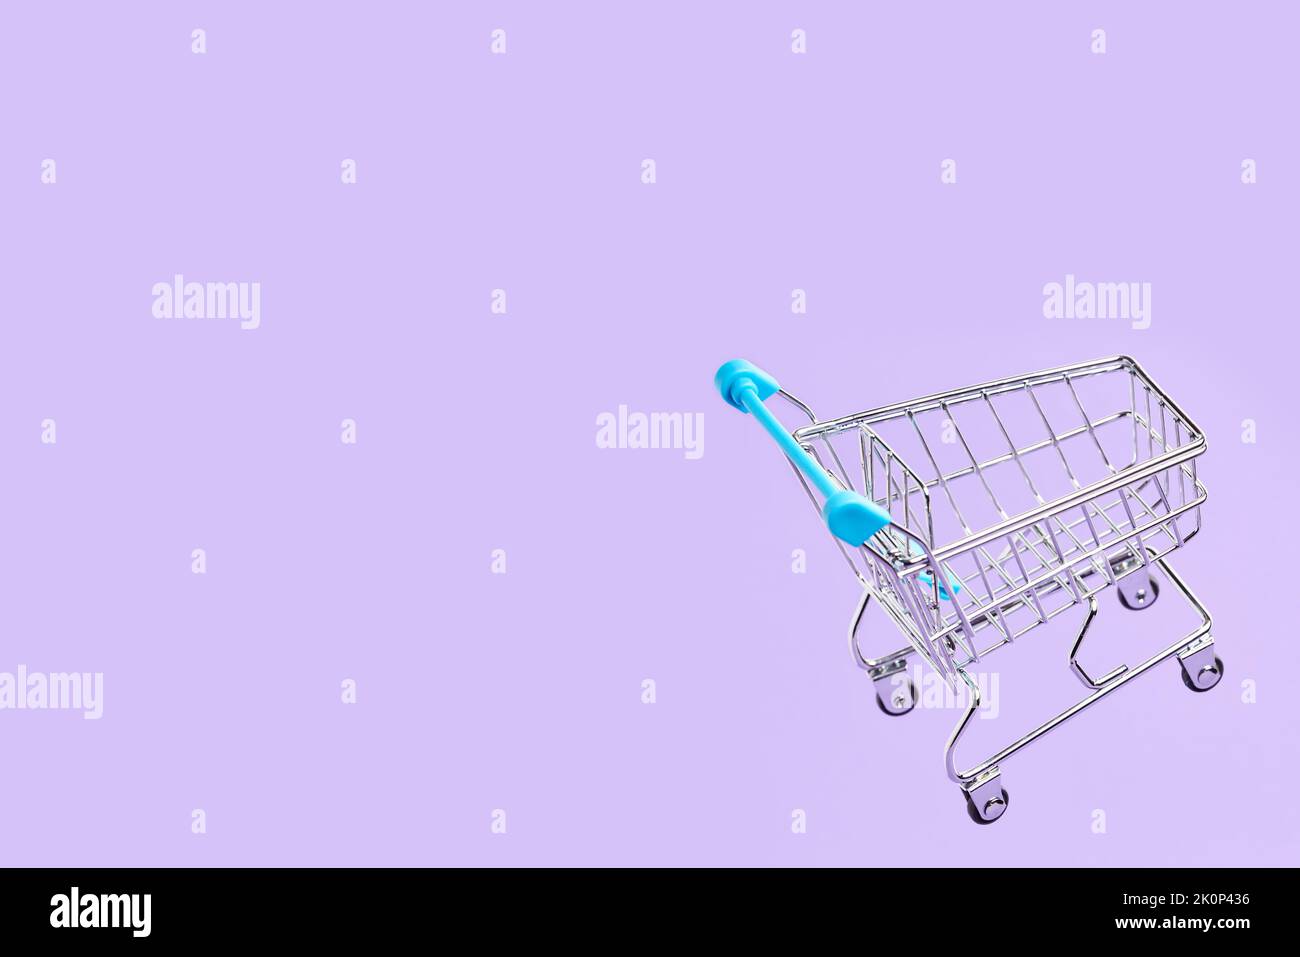 Empty shopping cart with light blue details flying on a pastel lilac background. Simple design with copy space. Concepts: market deals, seasonal sales Stock Photo